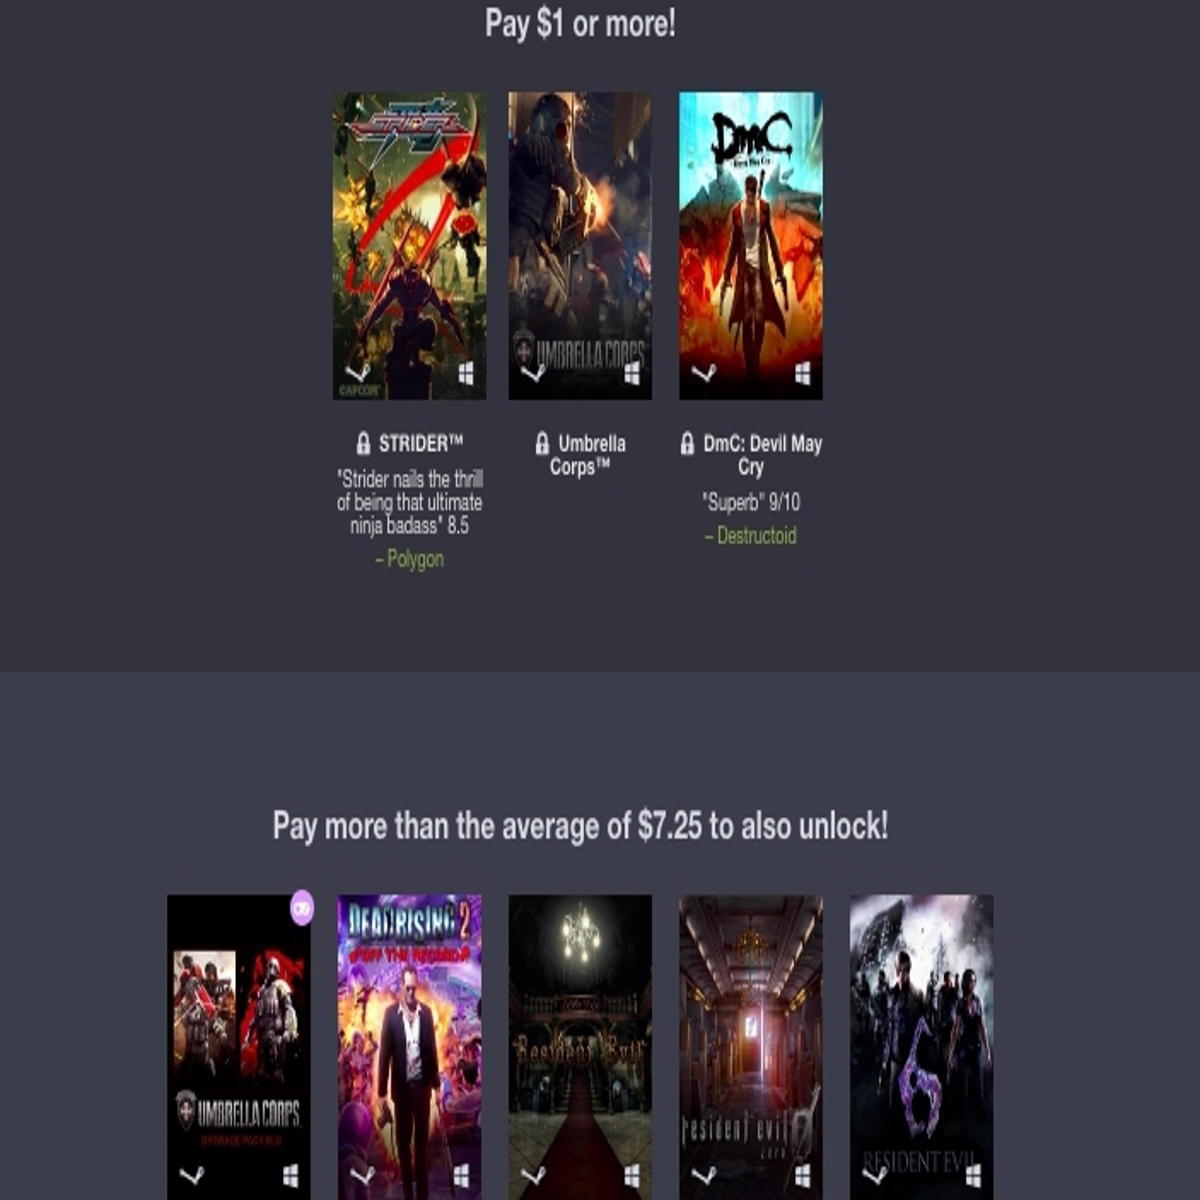 Humble Bundle offers 'Resident Evil' collection to raise money for